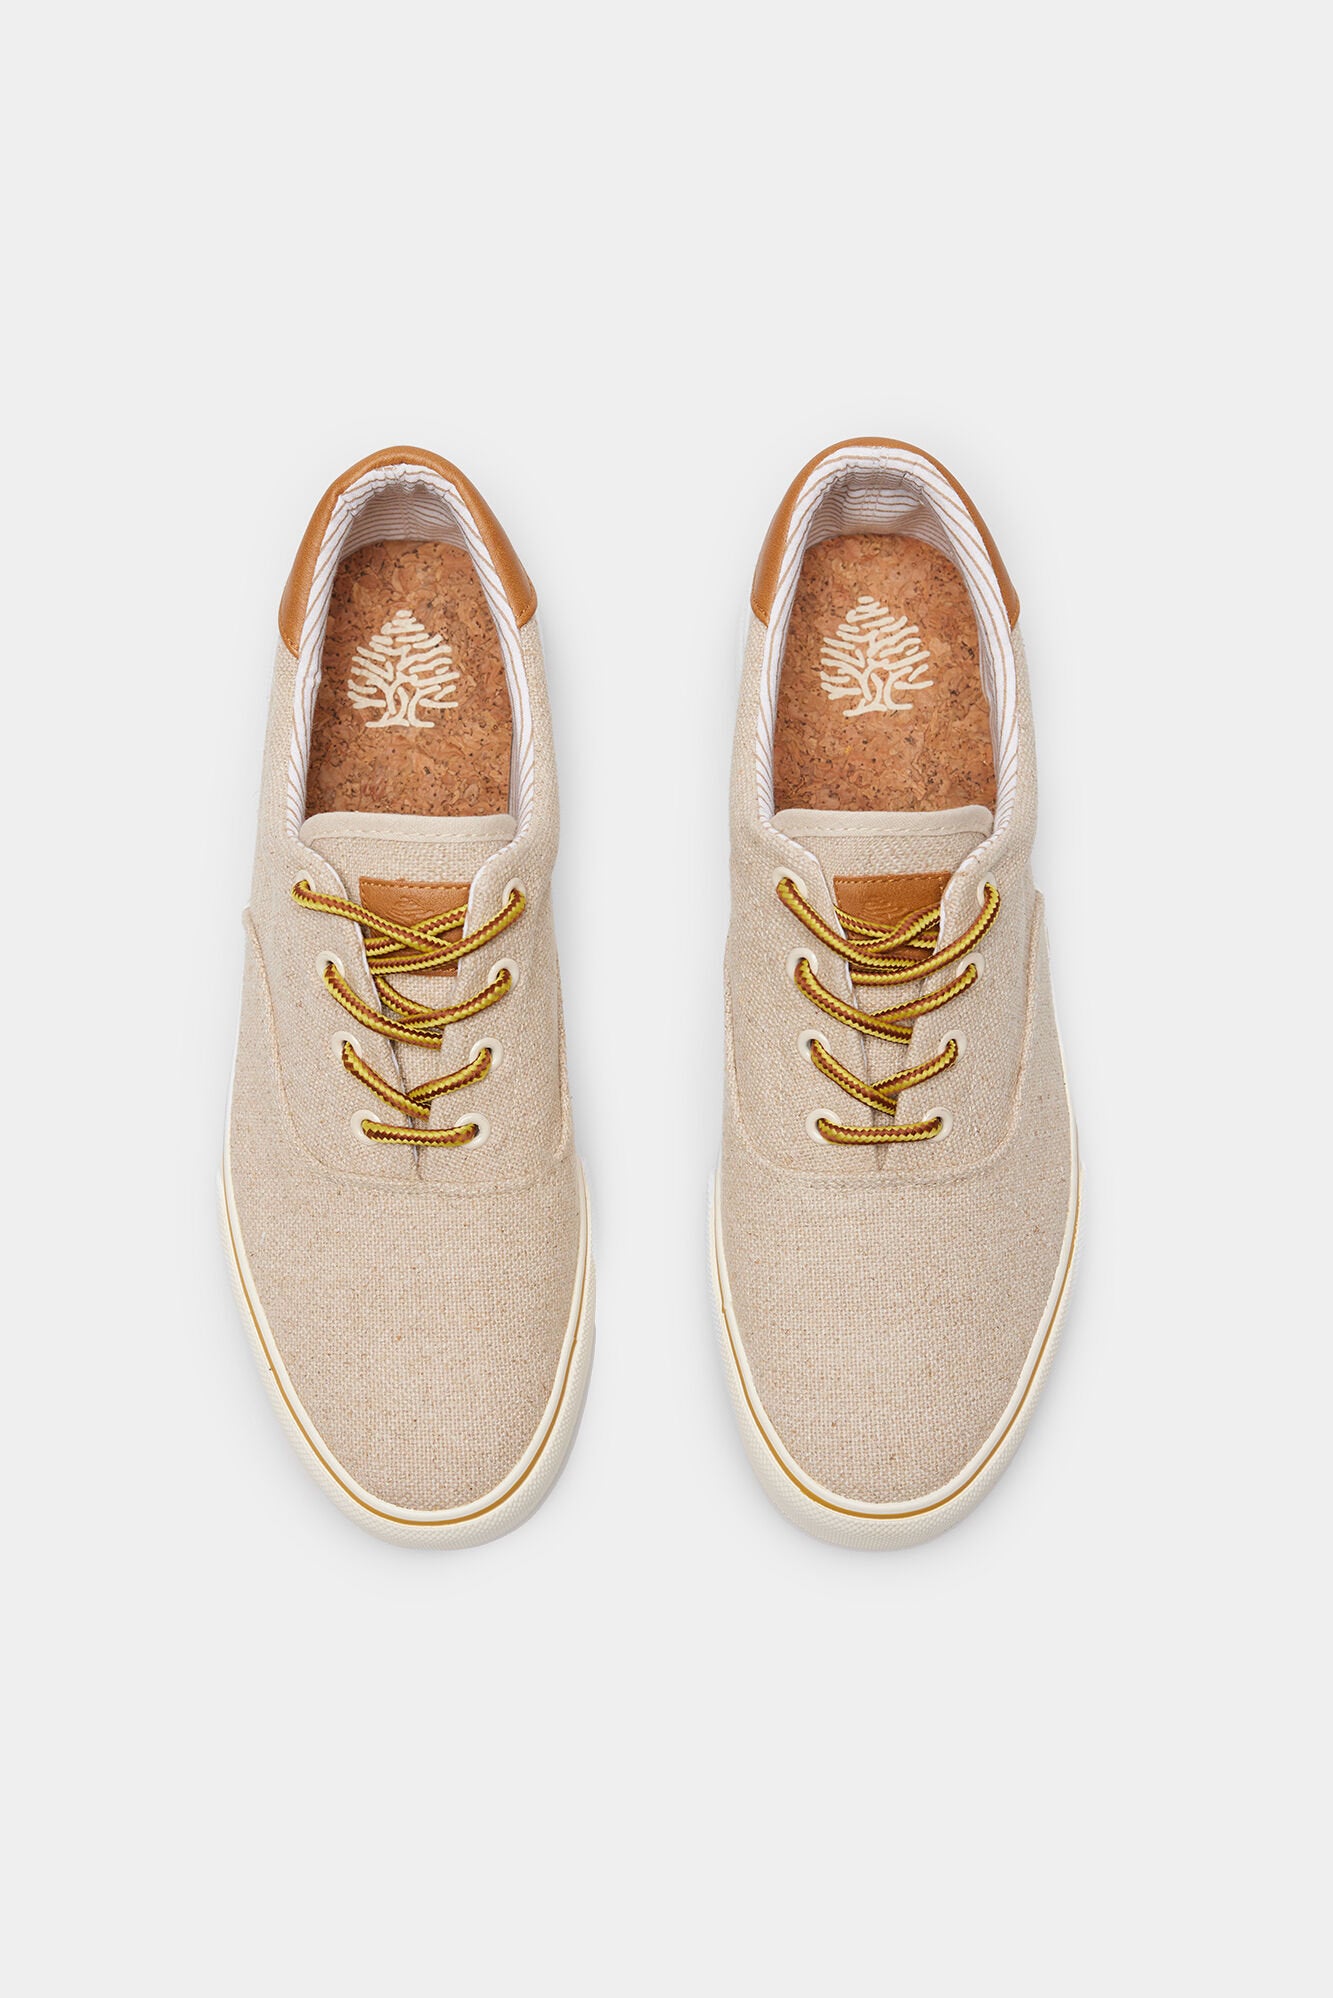 Beige And Brown Lace Up Trainers_2997585_97_05